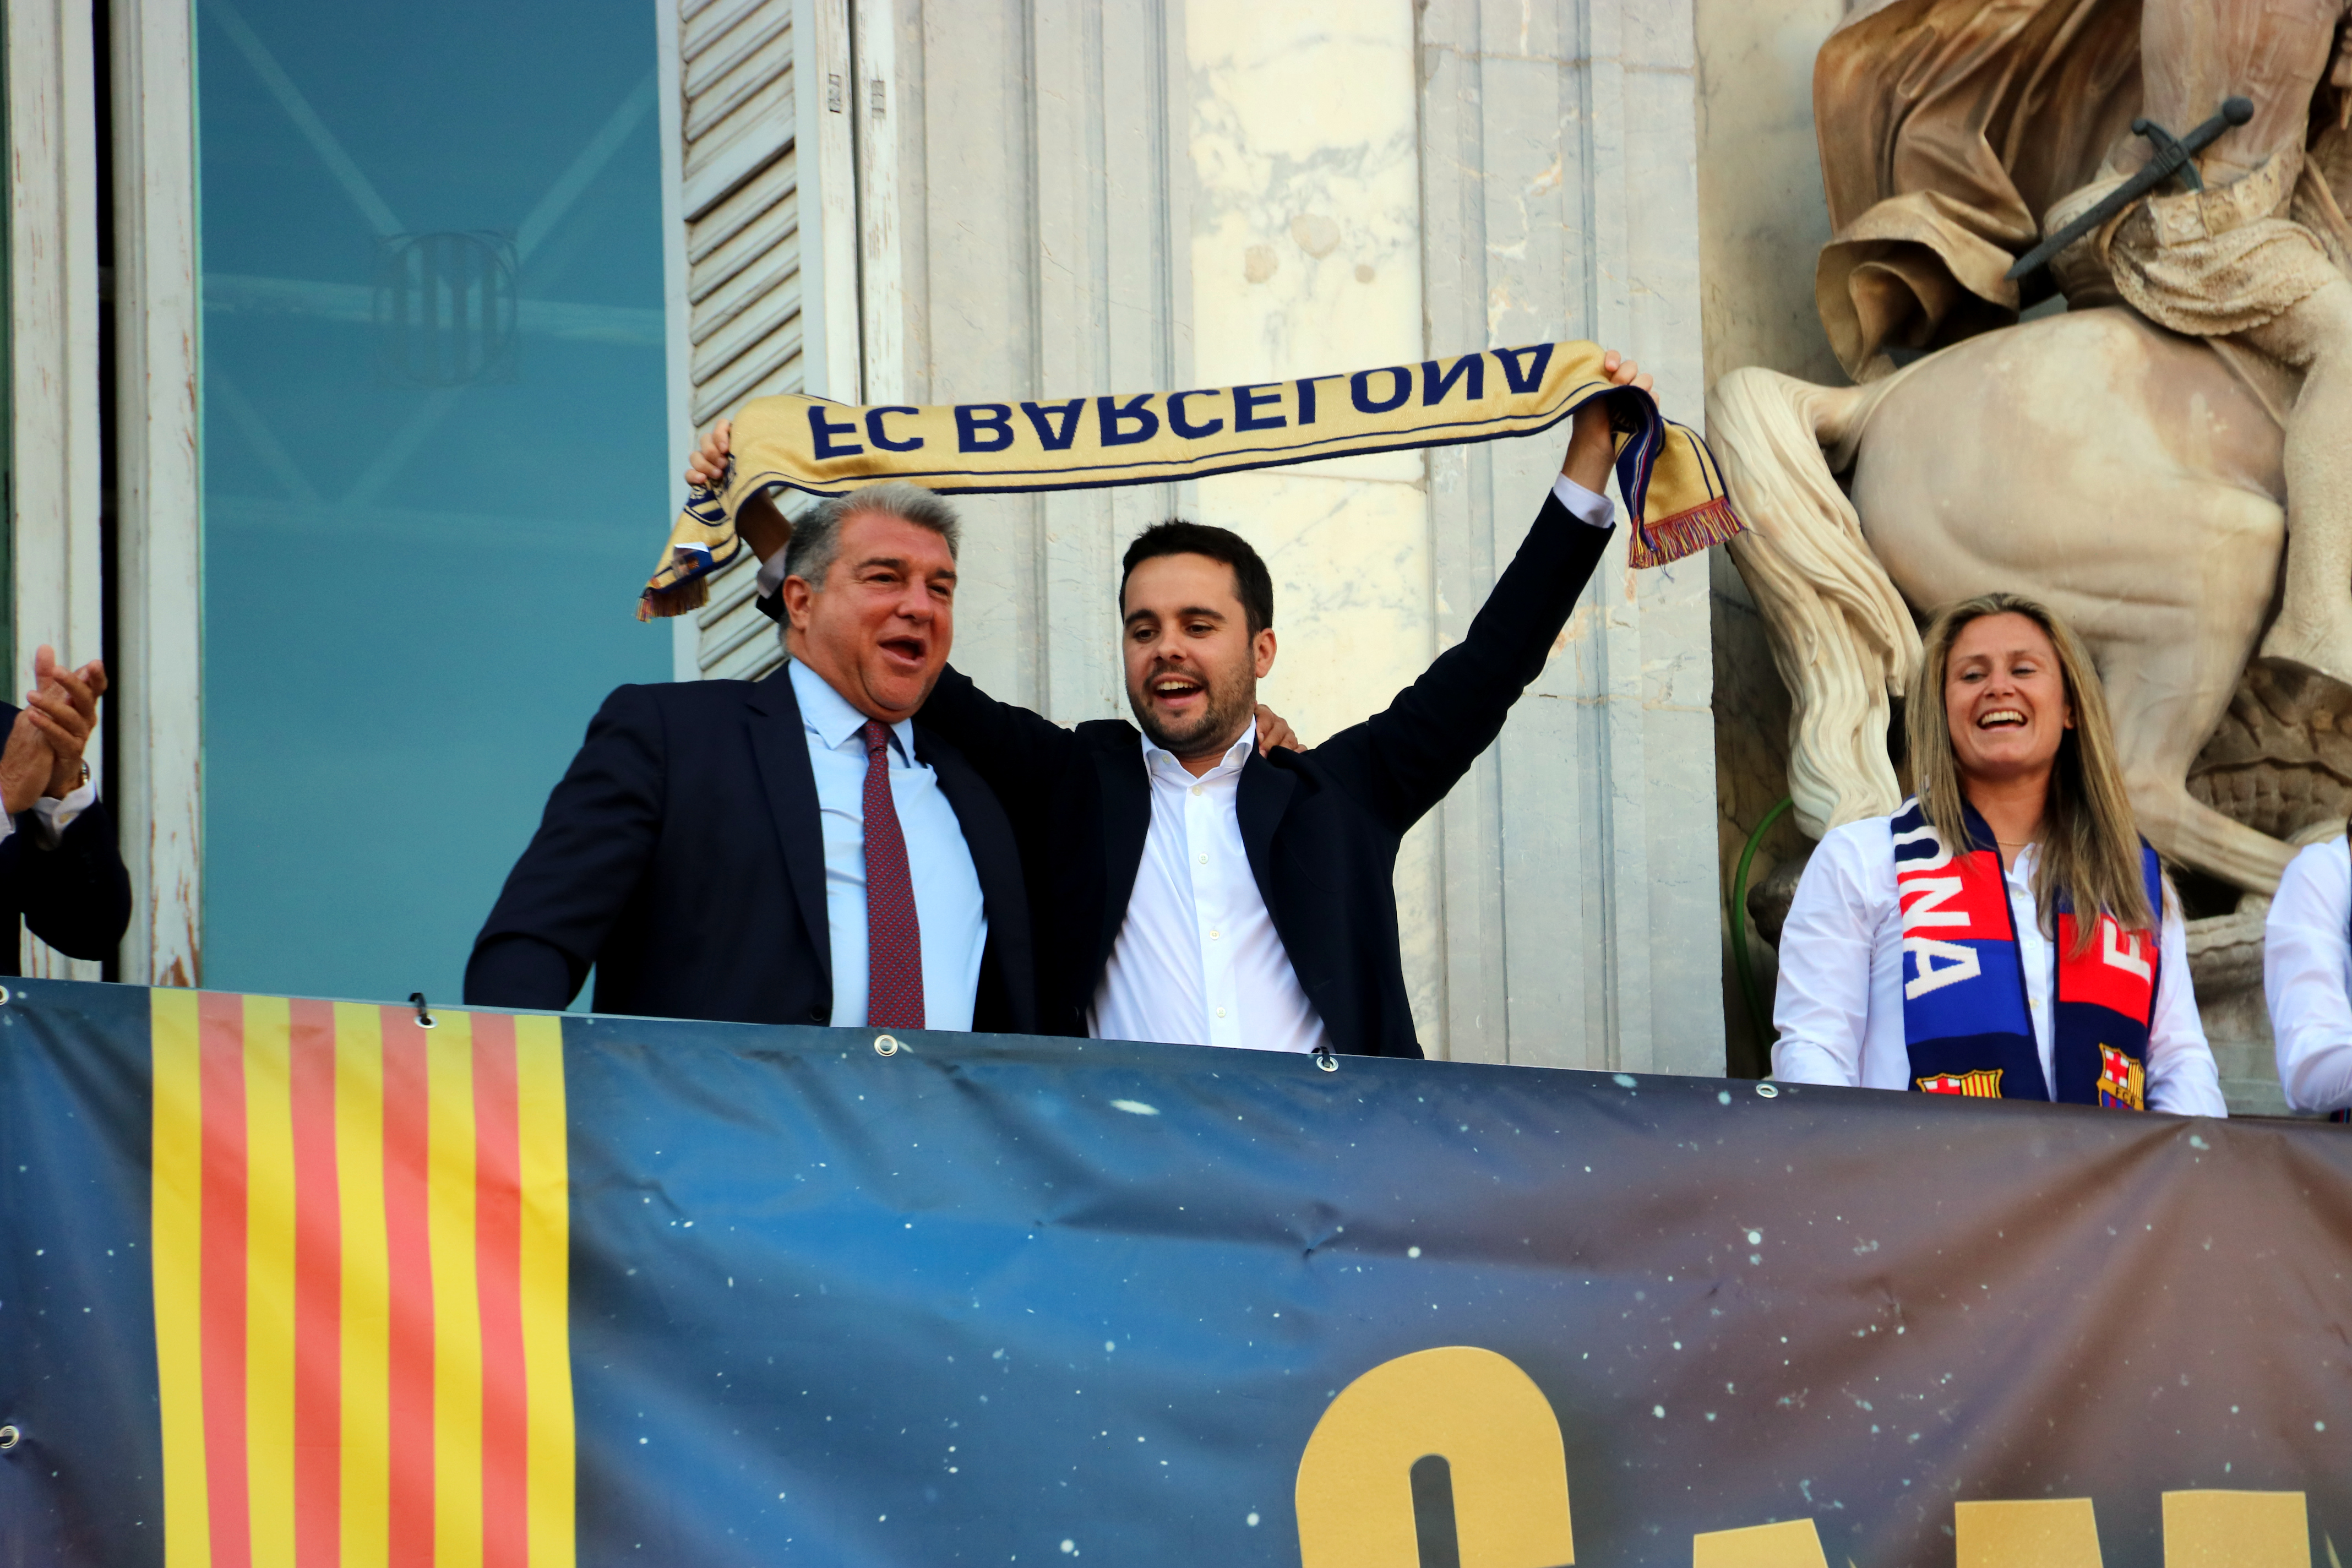 FC Barcelona Women's coach Jonatan Giráldez and Barça president Joan Laporta at the balcony of the Catalan government's headquarters on June 4, 2023 during the Champions League celebration